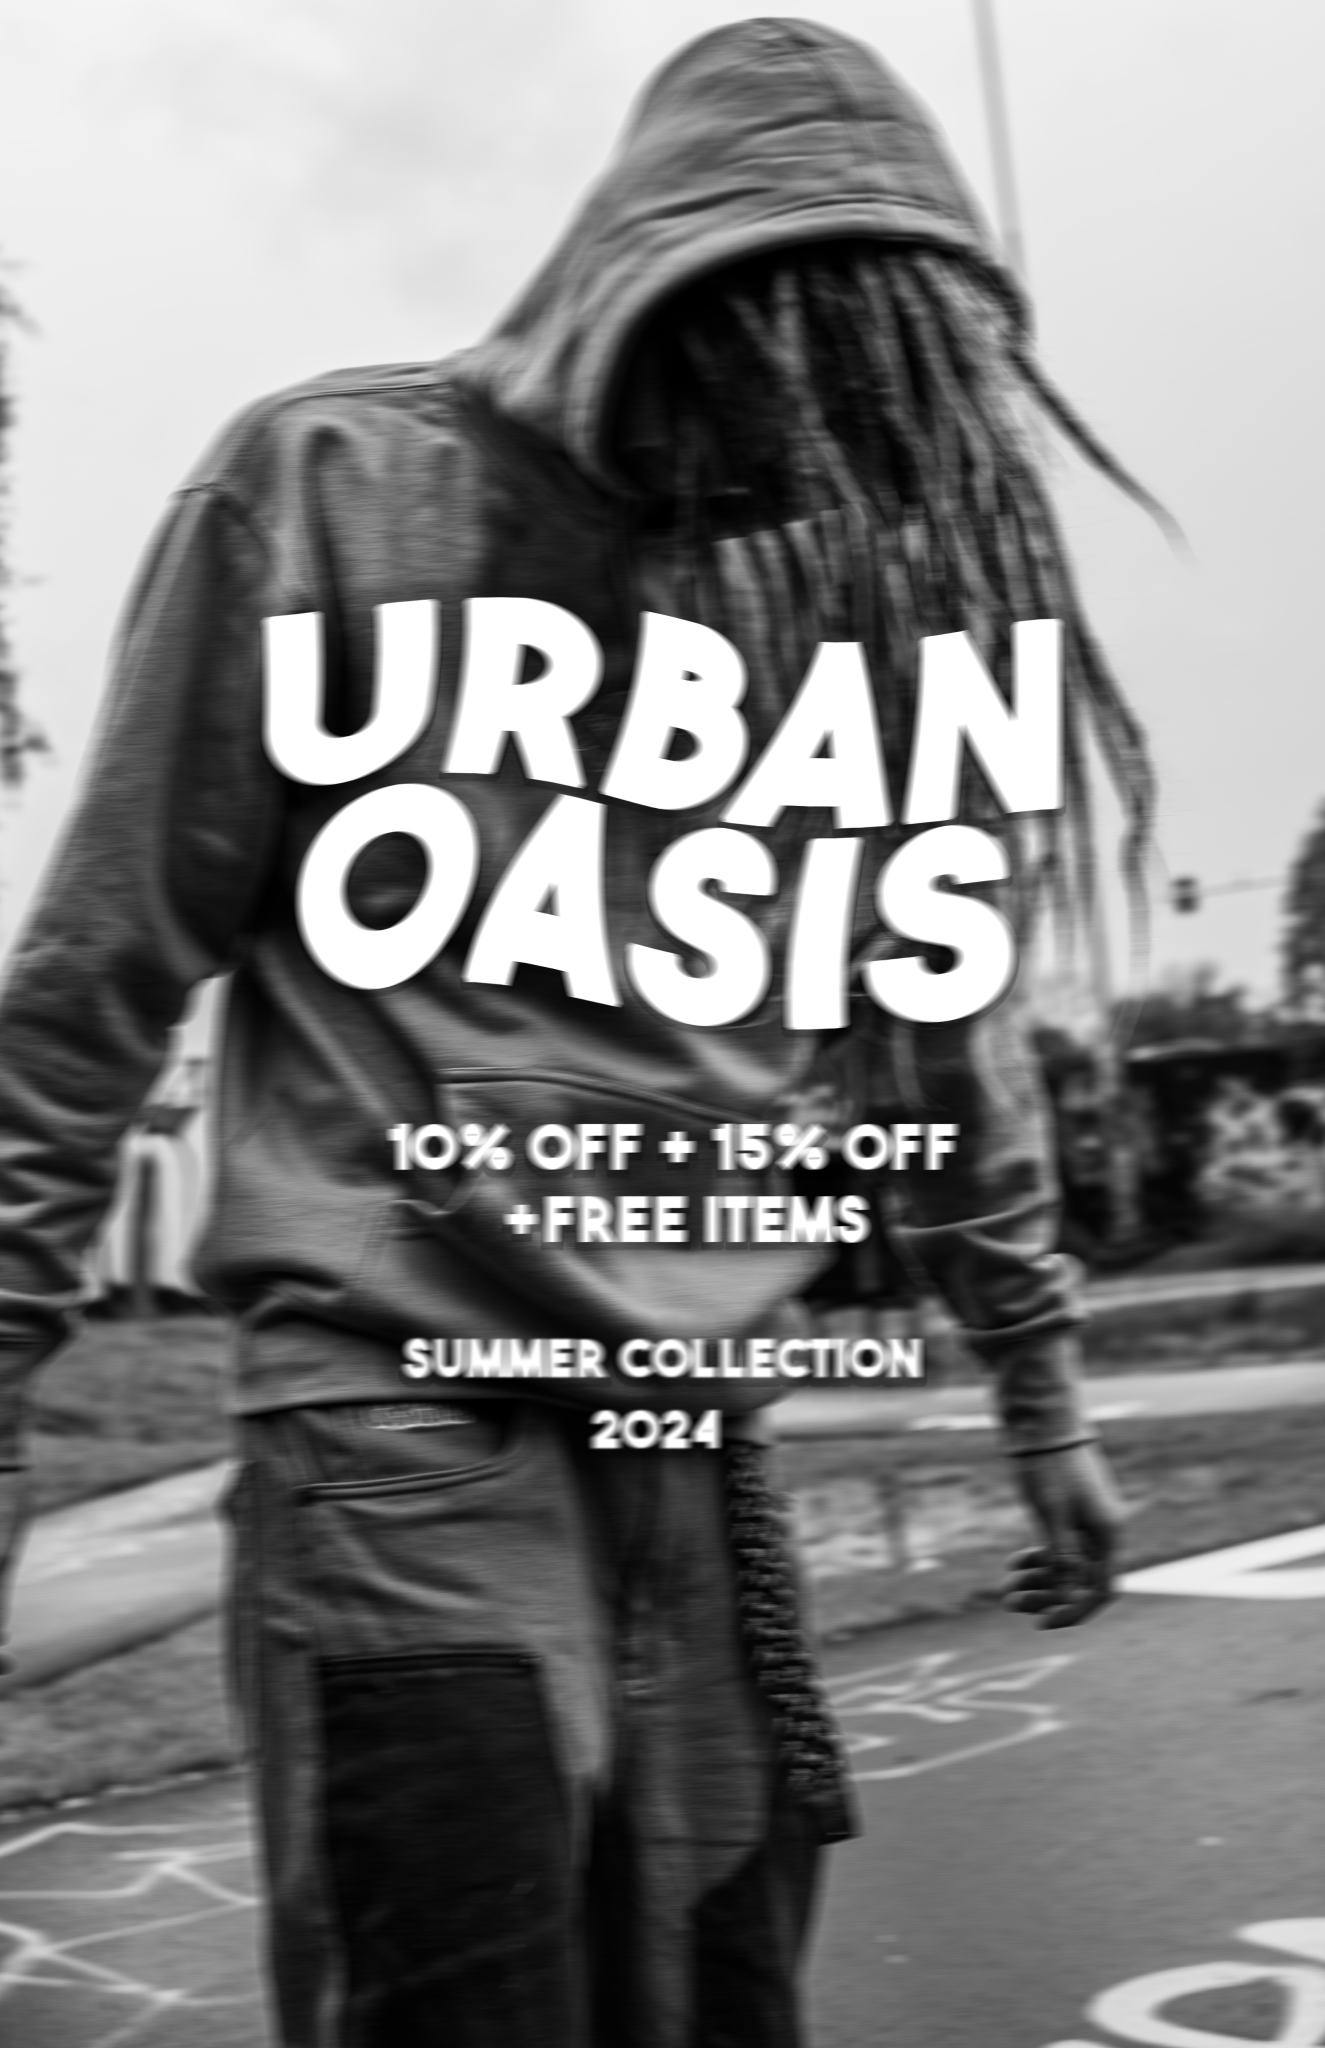 ‘URBAN OASIS' SUMMER COLLECTION - NELS.